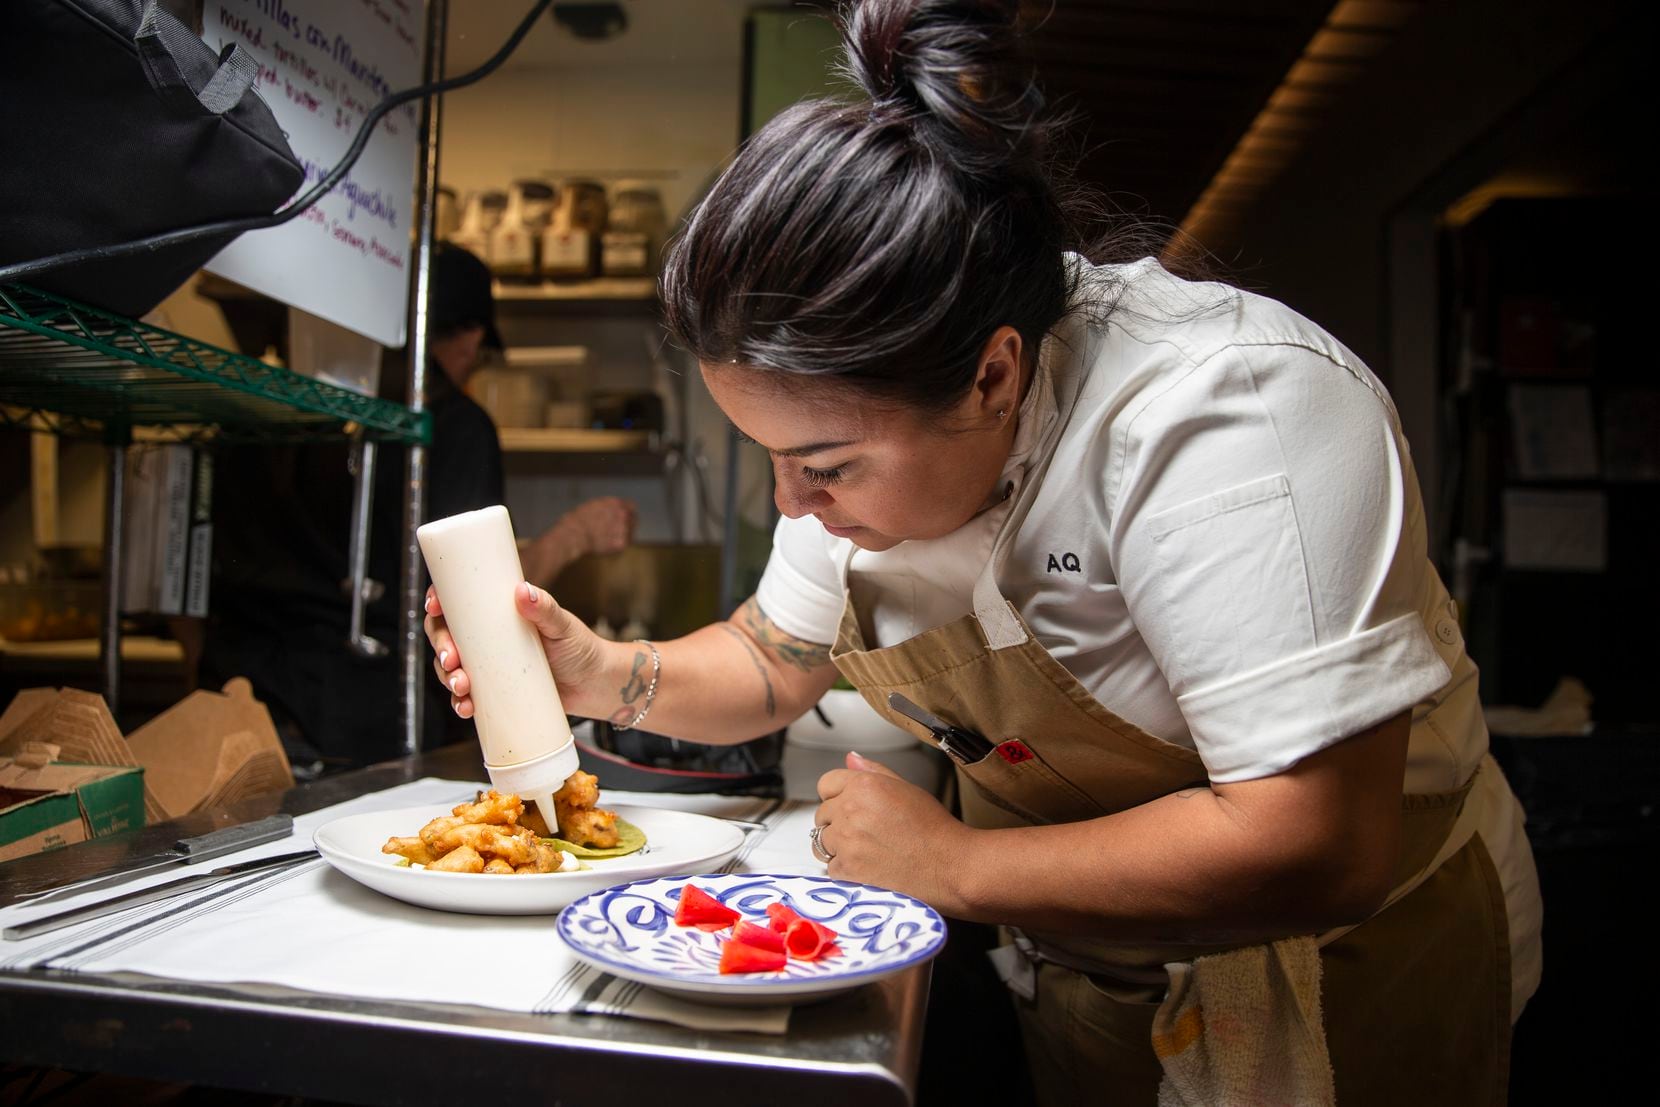 Chef Anastacia Quinones has been making some incredible food at José restaurant on Lovers Lane.